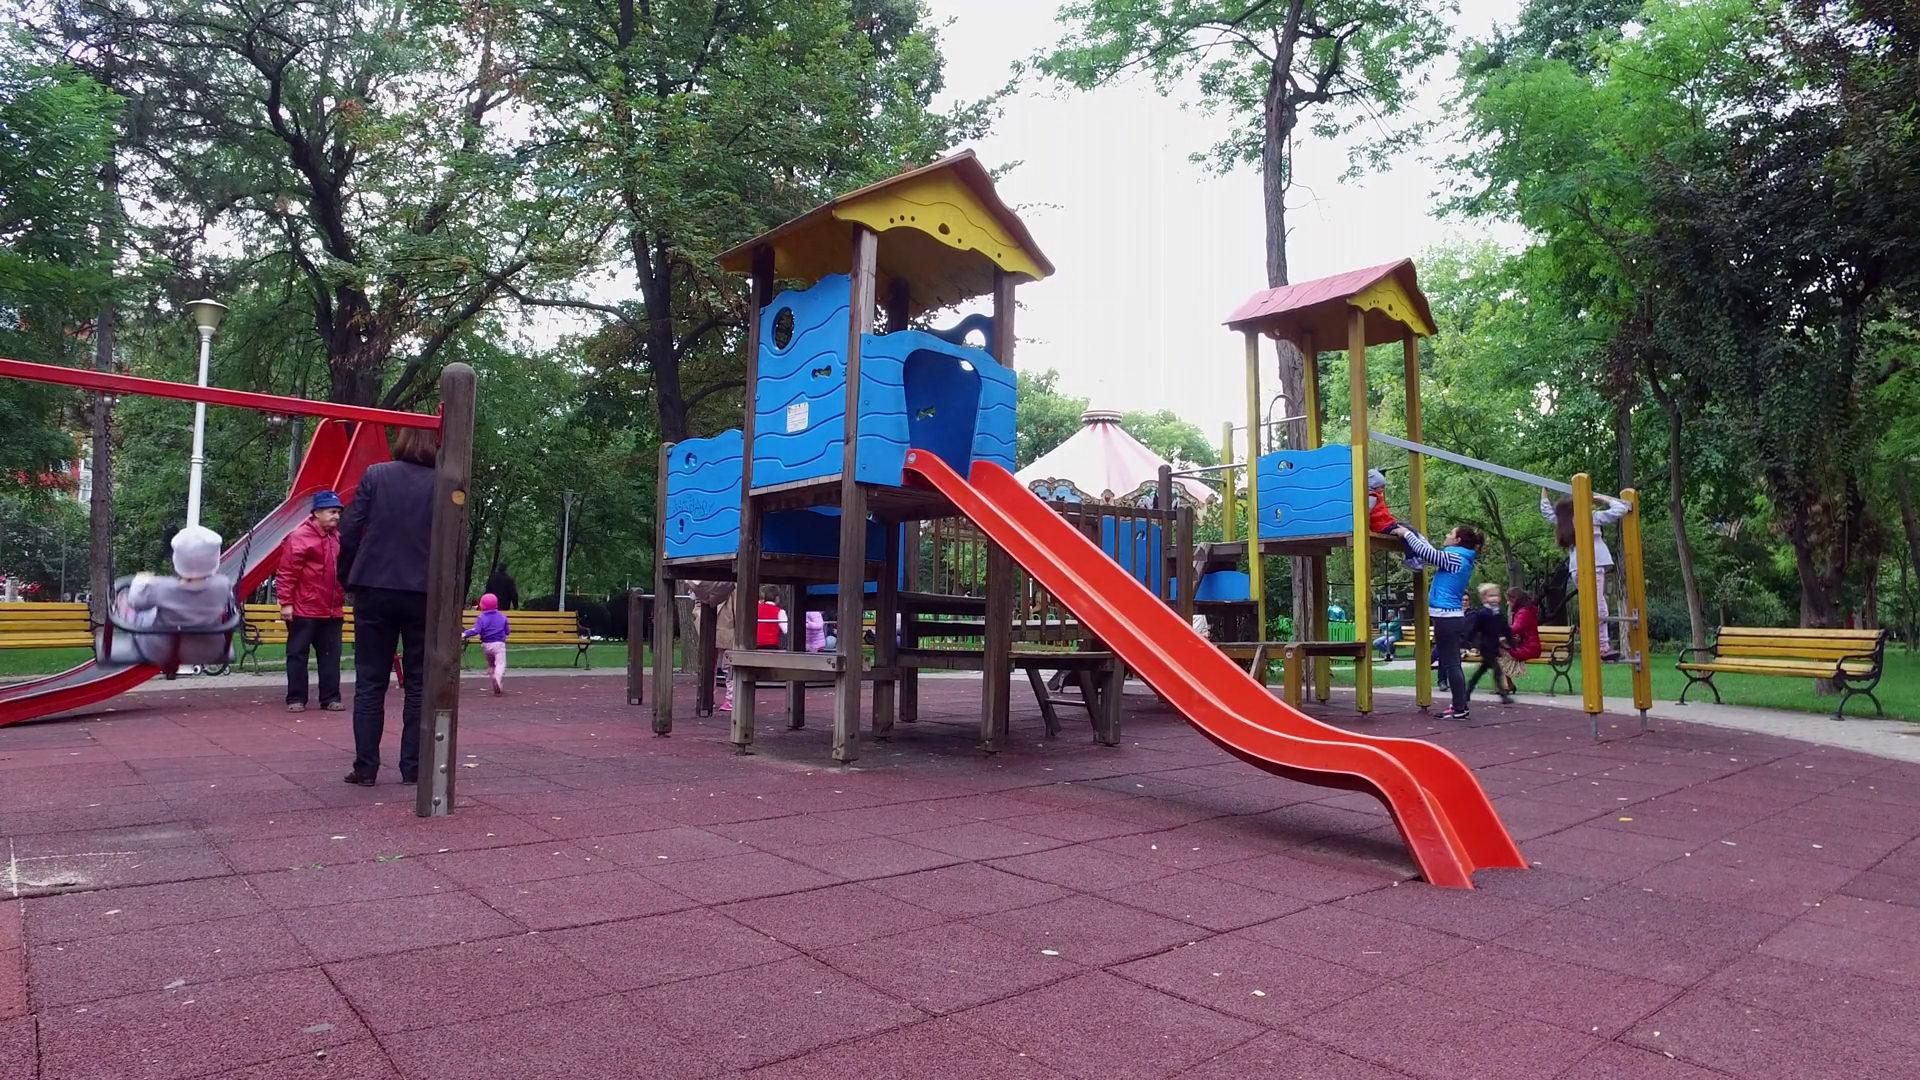 Children's playground with slide swings and merry-go-round in a park ...